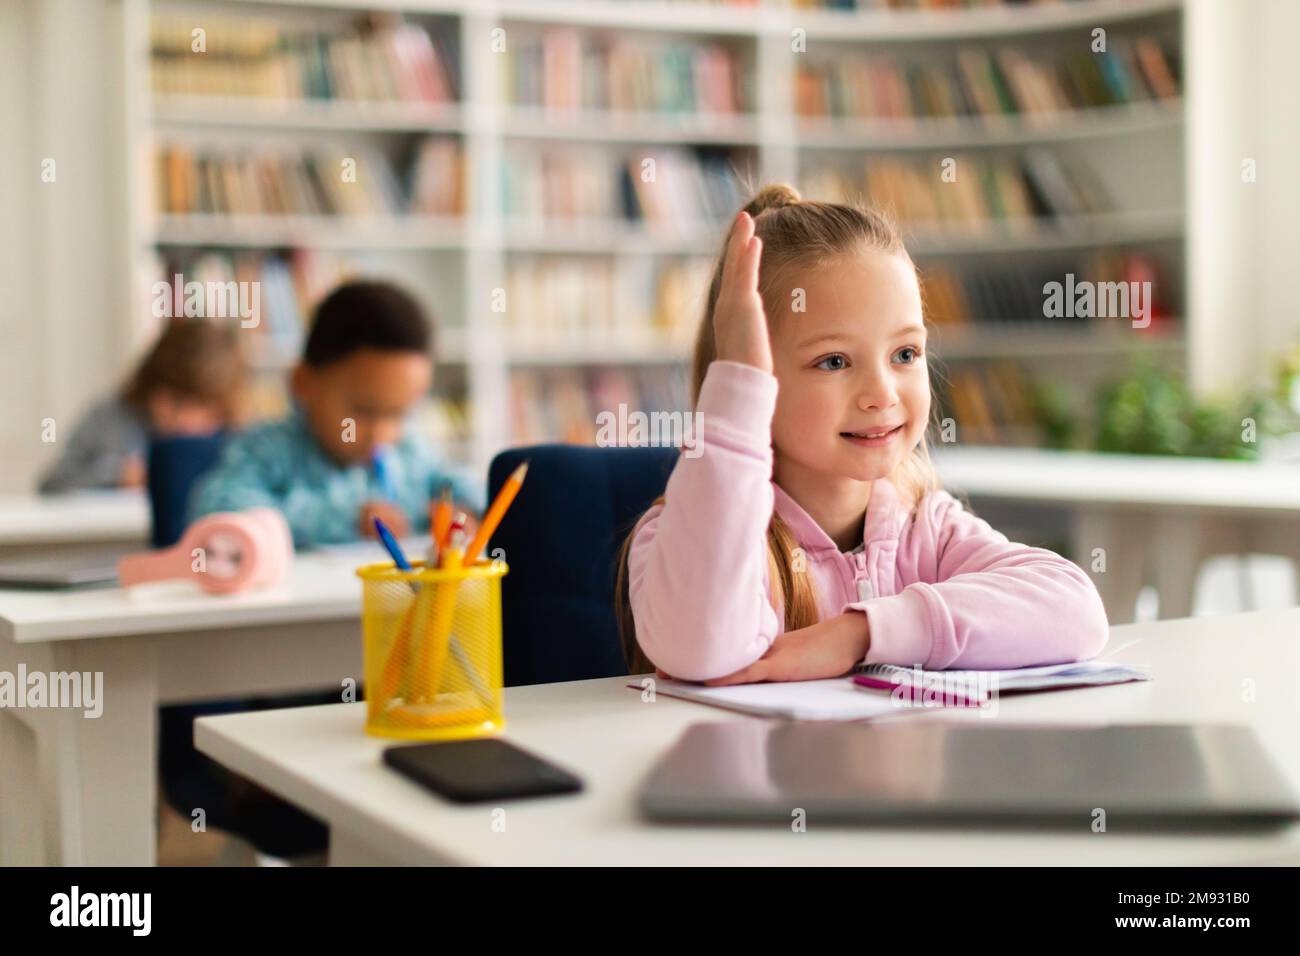 Education, elementary school concept. Pretty schoolgirl raising hand for an answer, sitting in classroom Stock Photo